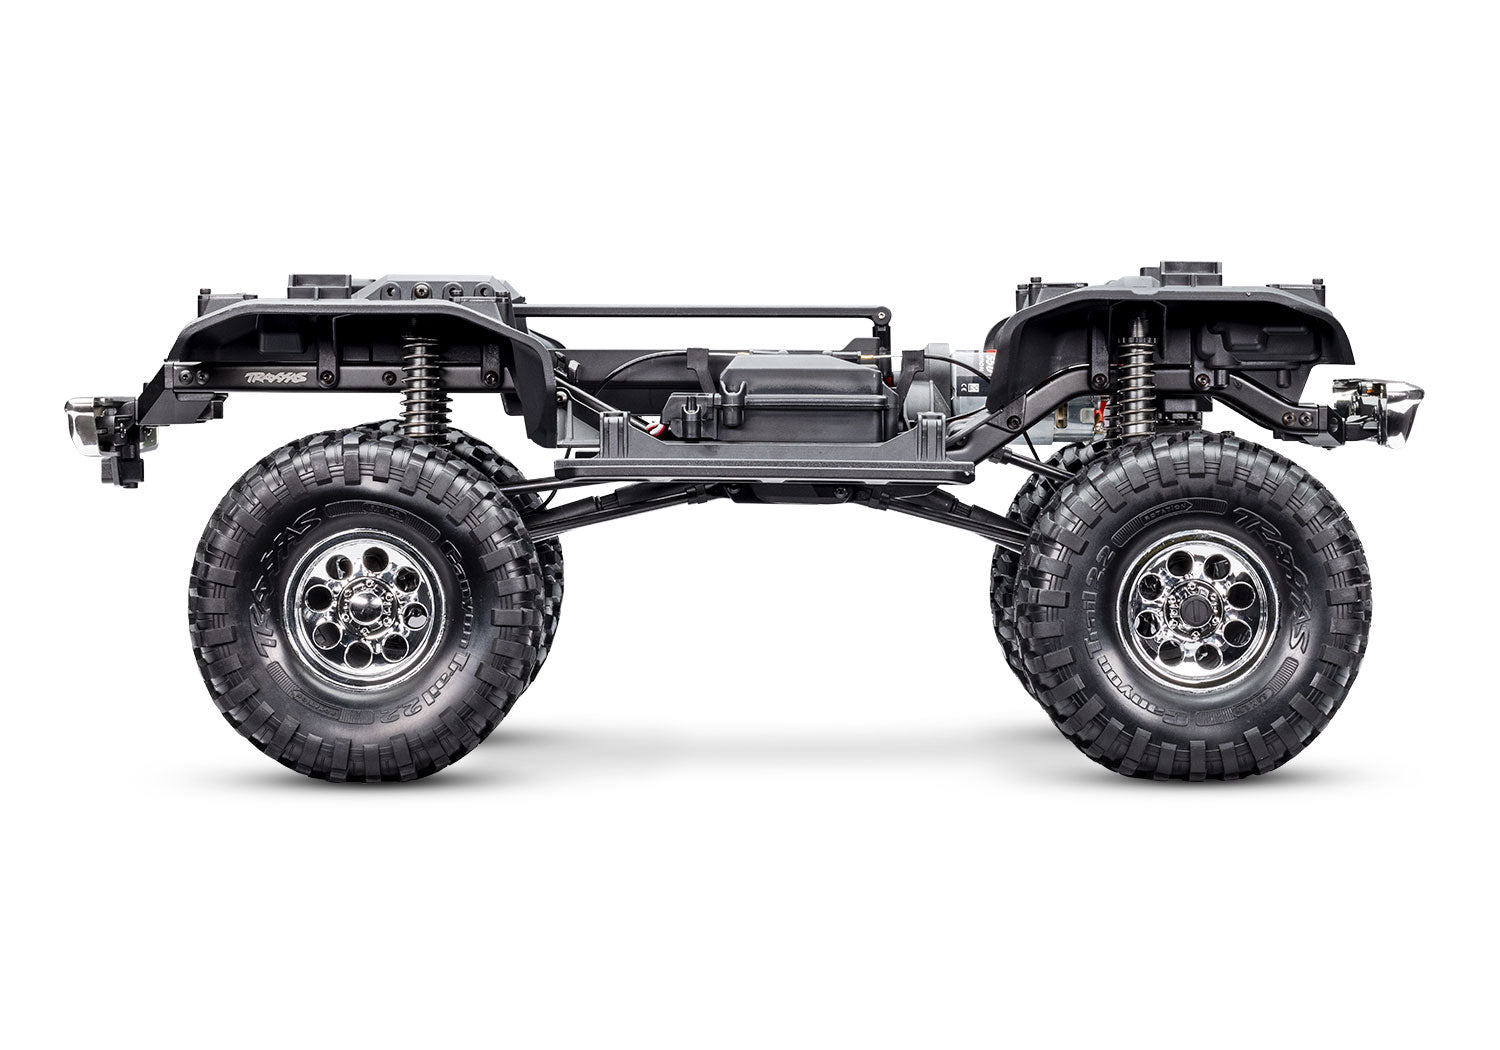 92086-4 RED TRX-4® High Trail Edition™ with 1972 Chevrolet® Blazer® Body: 4WD Electric Truck with TQi™